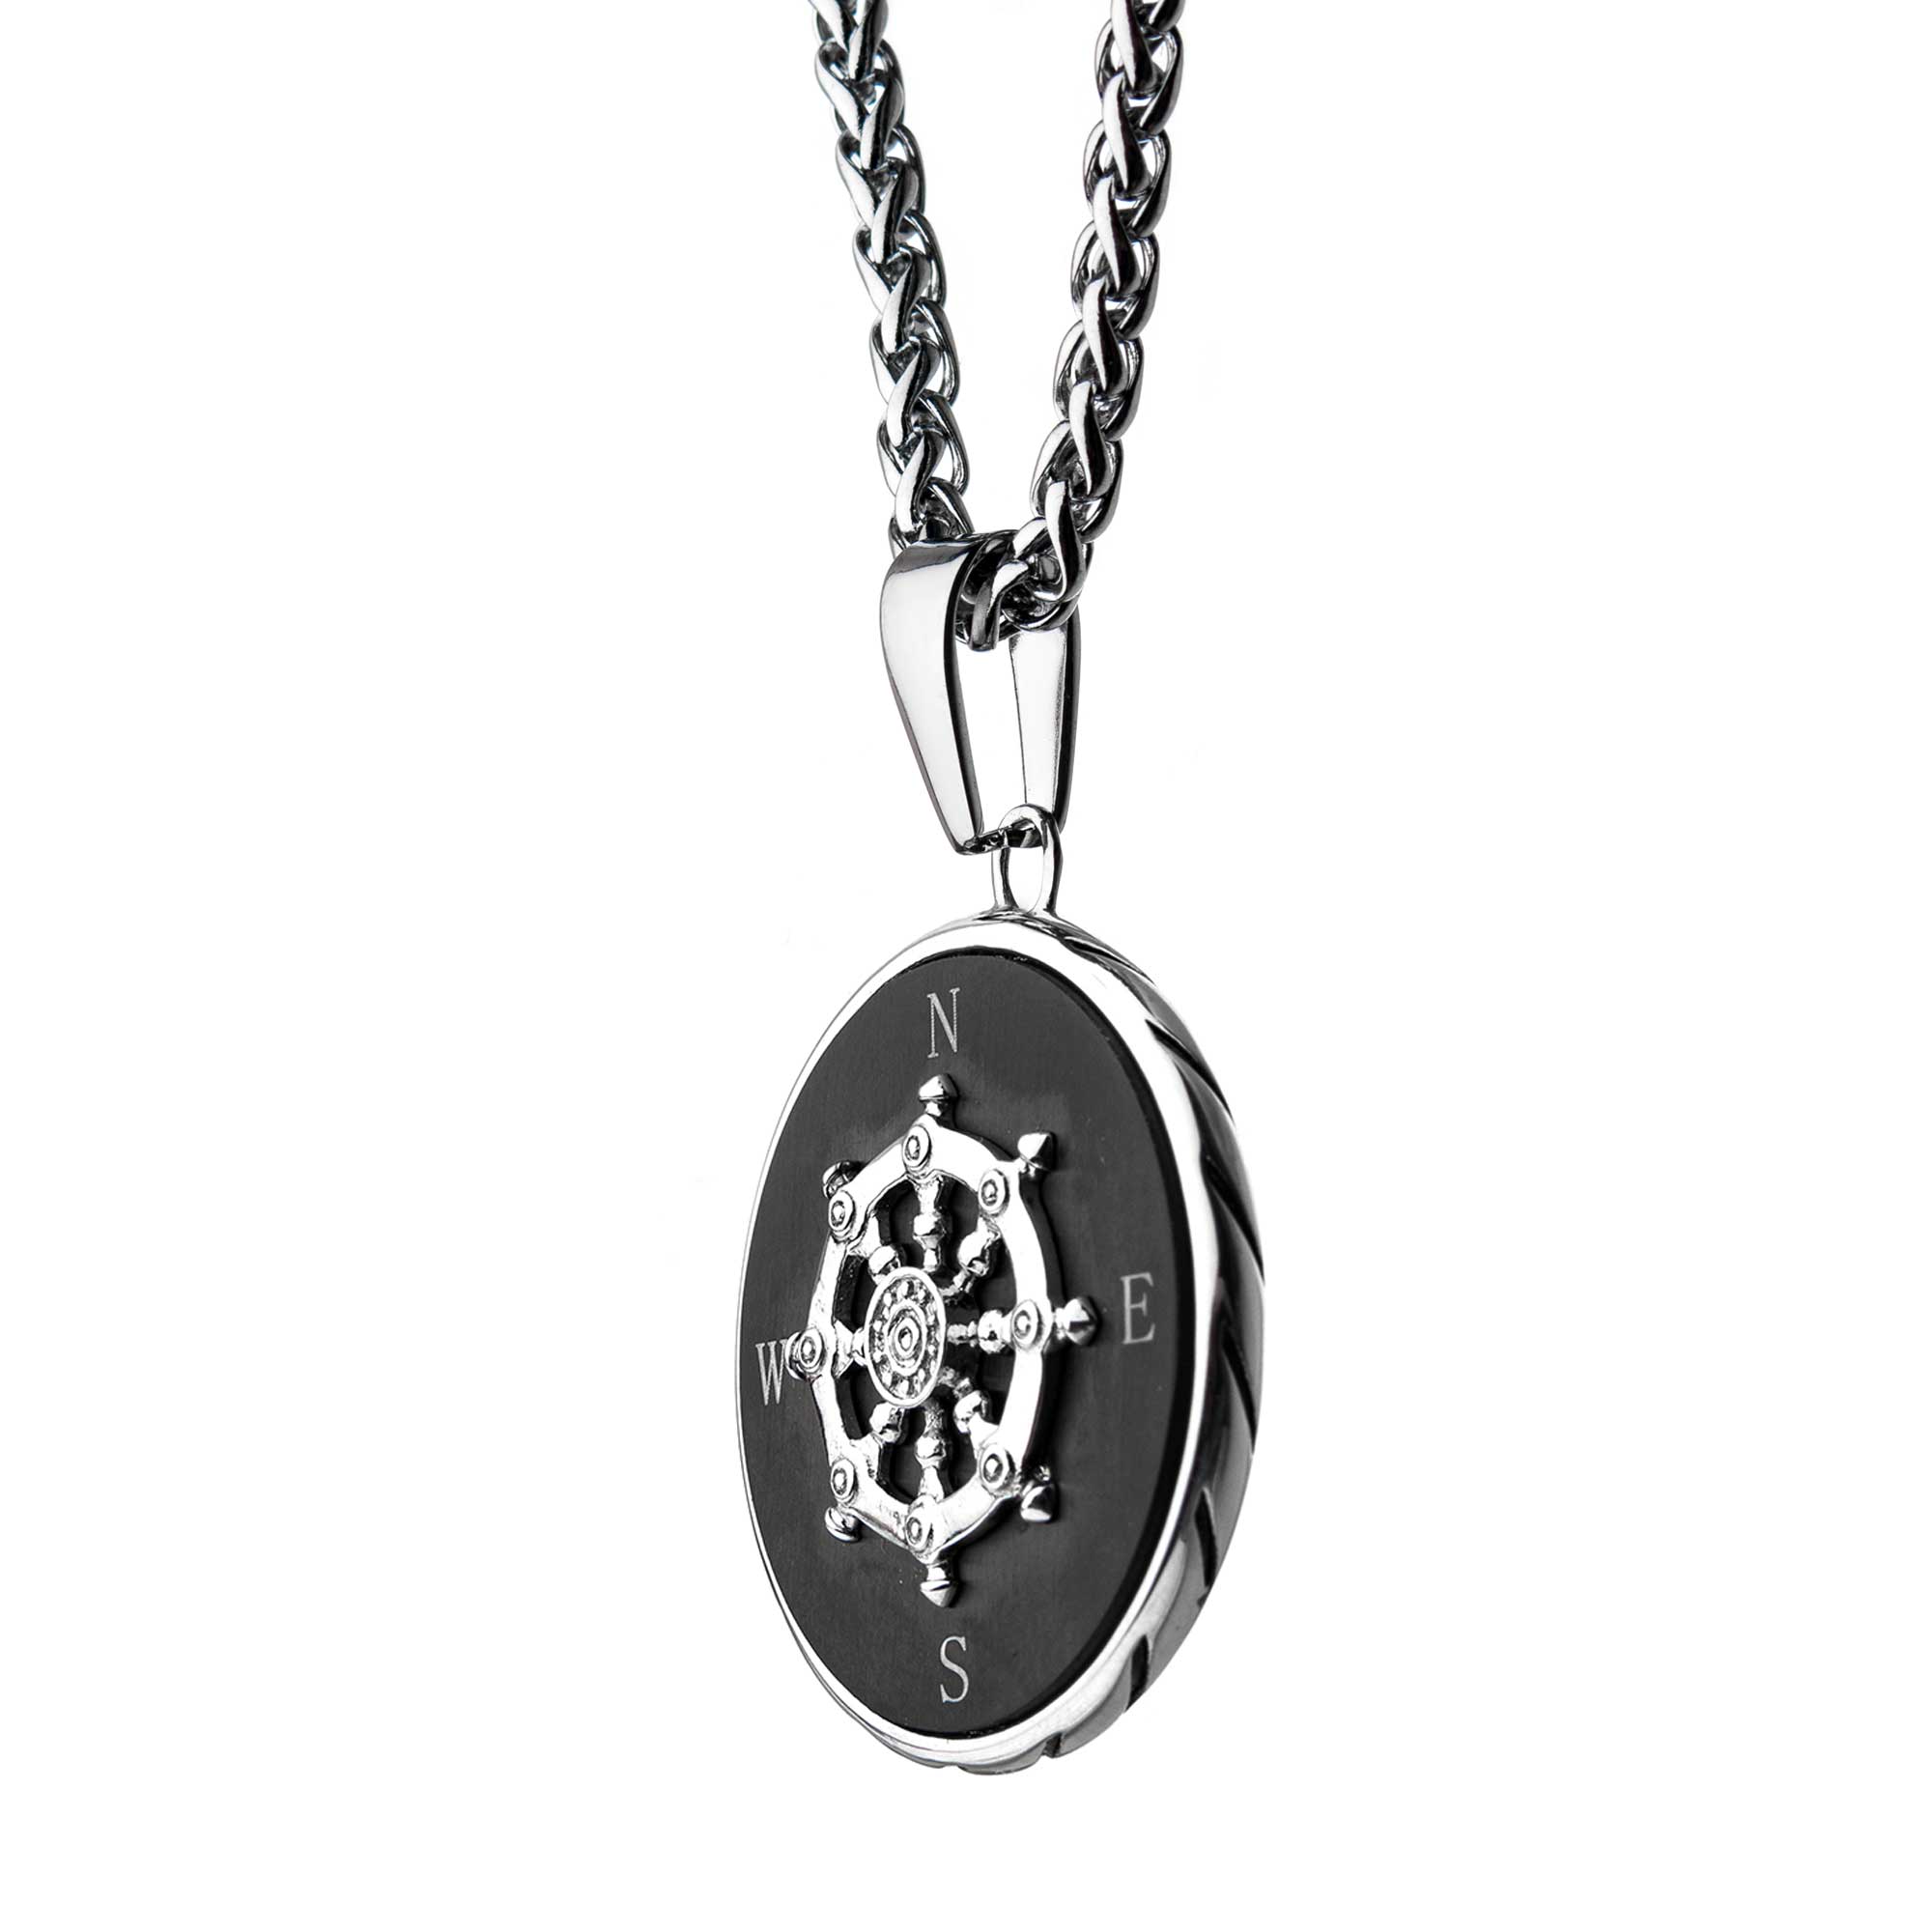 Stainless Steel Black Plated Ship's Wheel Compass Pendant with Chain Image 3 Thurber's Fine Jewelry Wadsworth, OH